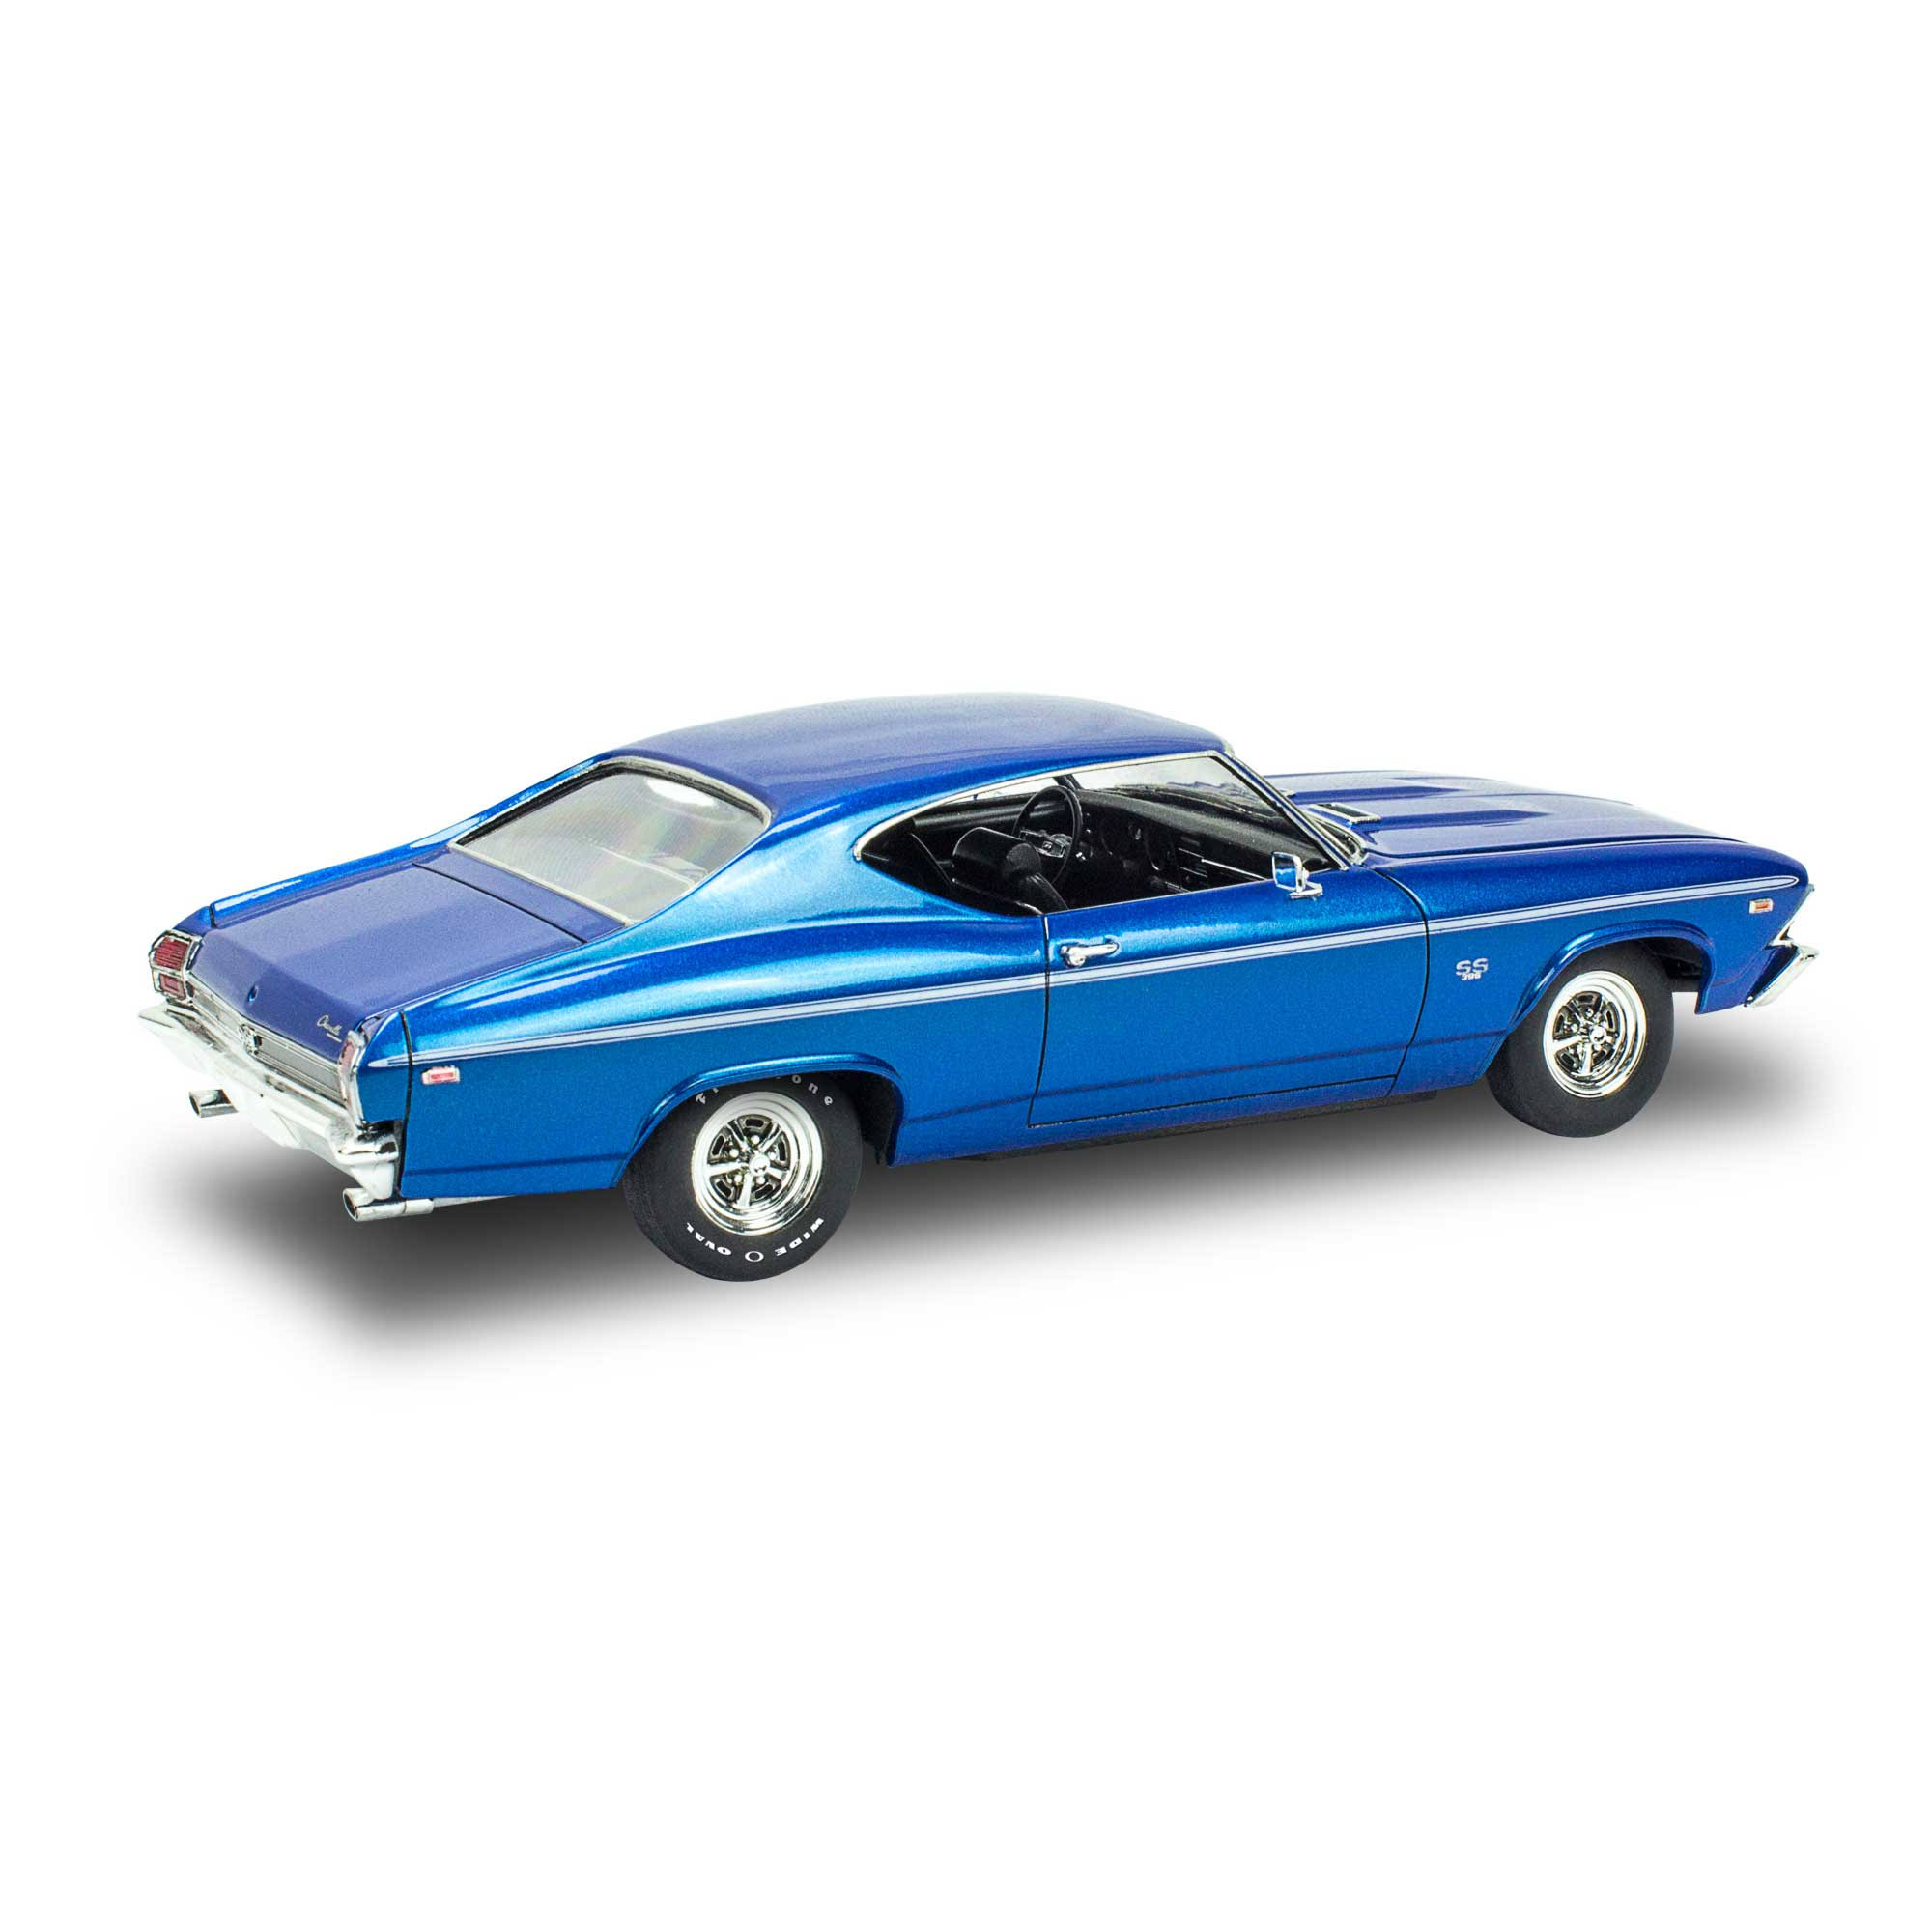 Revell 1/25 1969 Chevy Chevelle SS 396